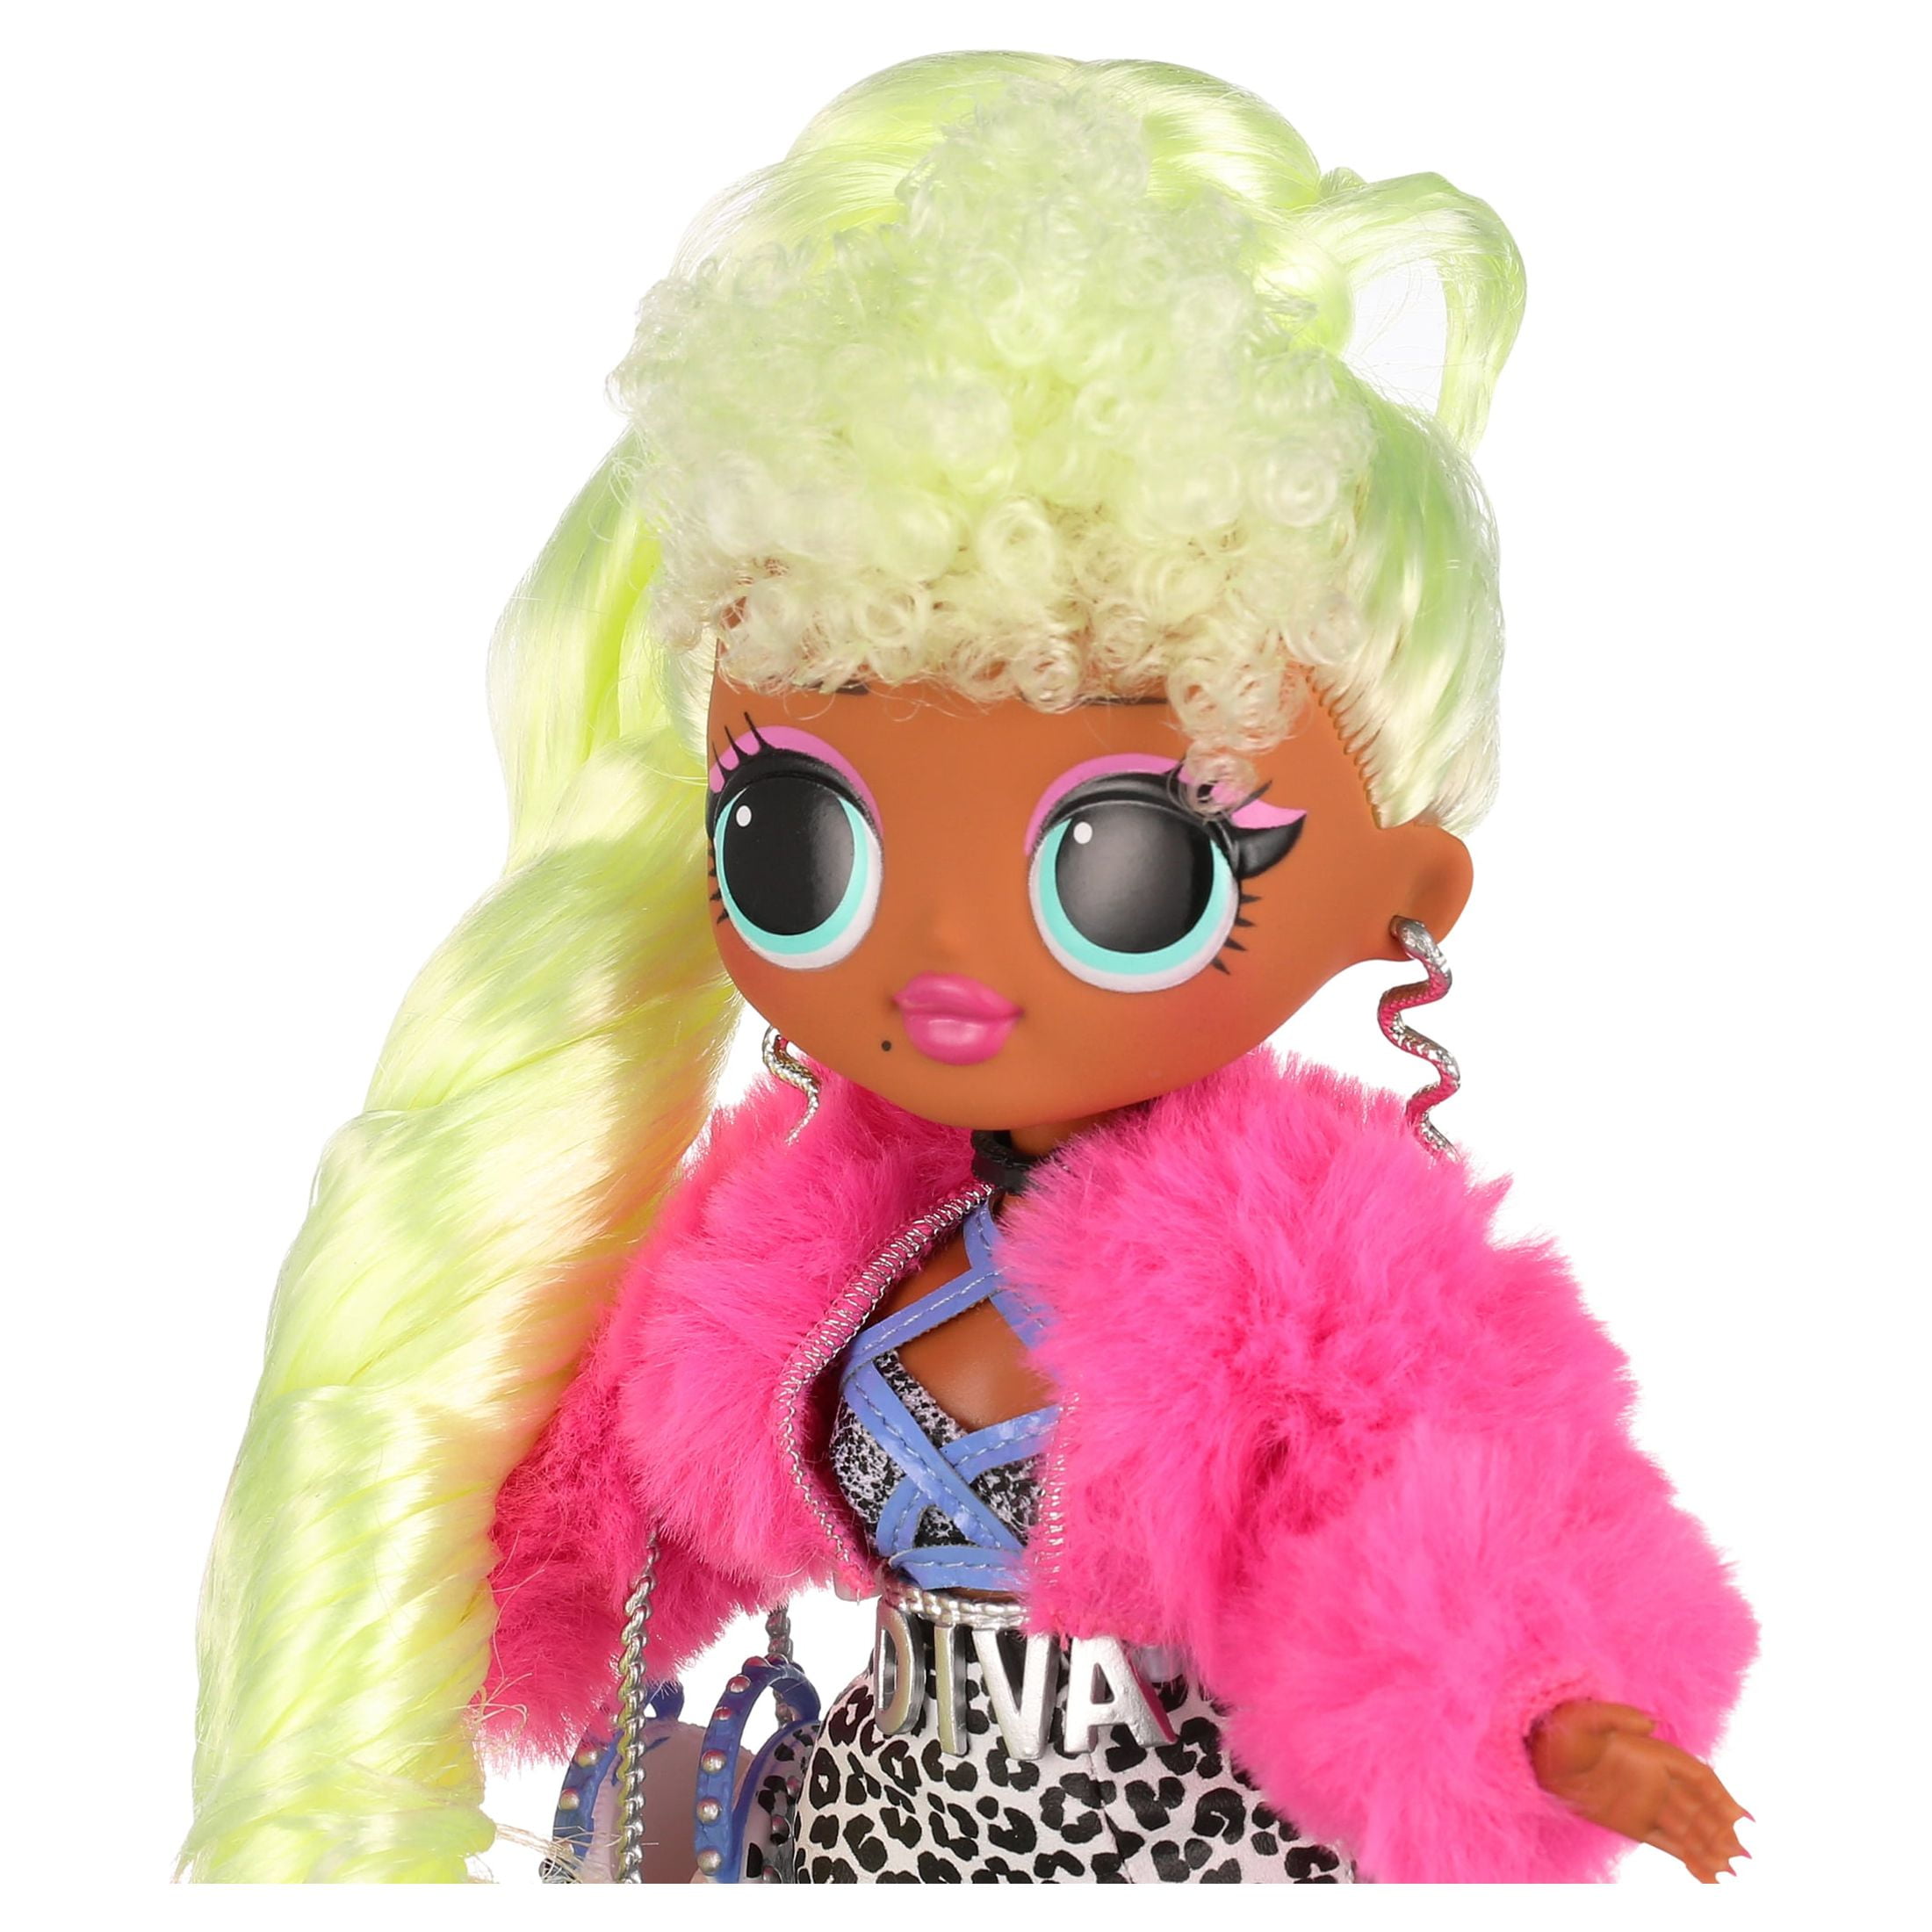 LOL Surprise! OMG Fierce Lady Diva 11.5 Fashion Doll with X Surprises  Including Accessories & Outfits, Holiday Toy, Great Gift for Kids Girls  Boys